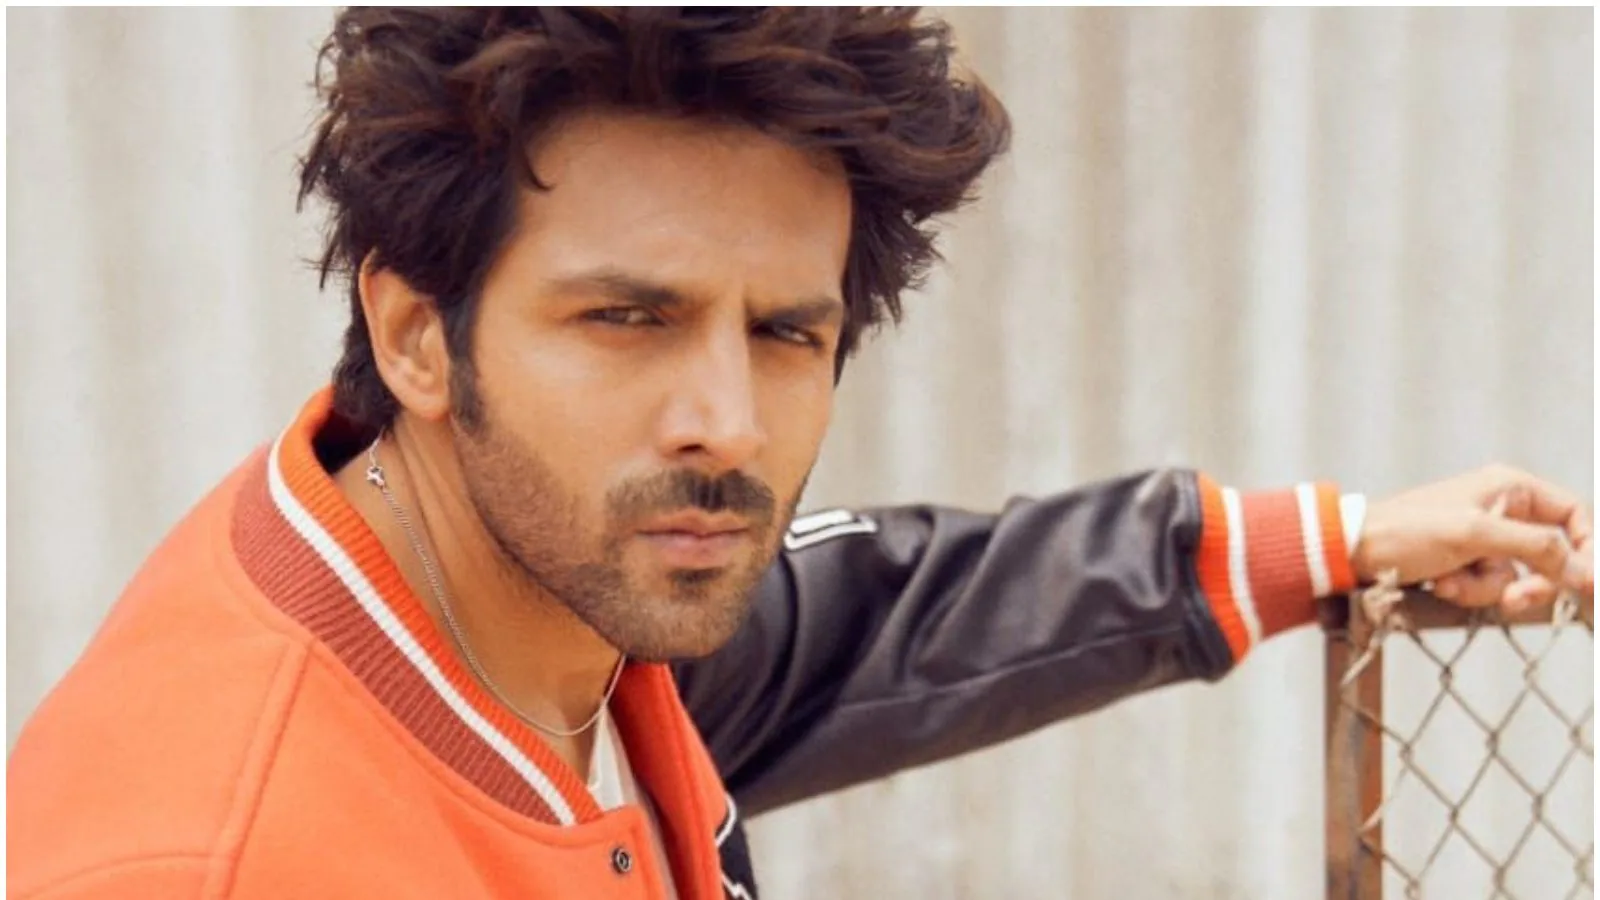 Kartik Aaryan Says He Wants to Meet His Fans and ‘Have One-on-One Conversations with Them’